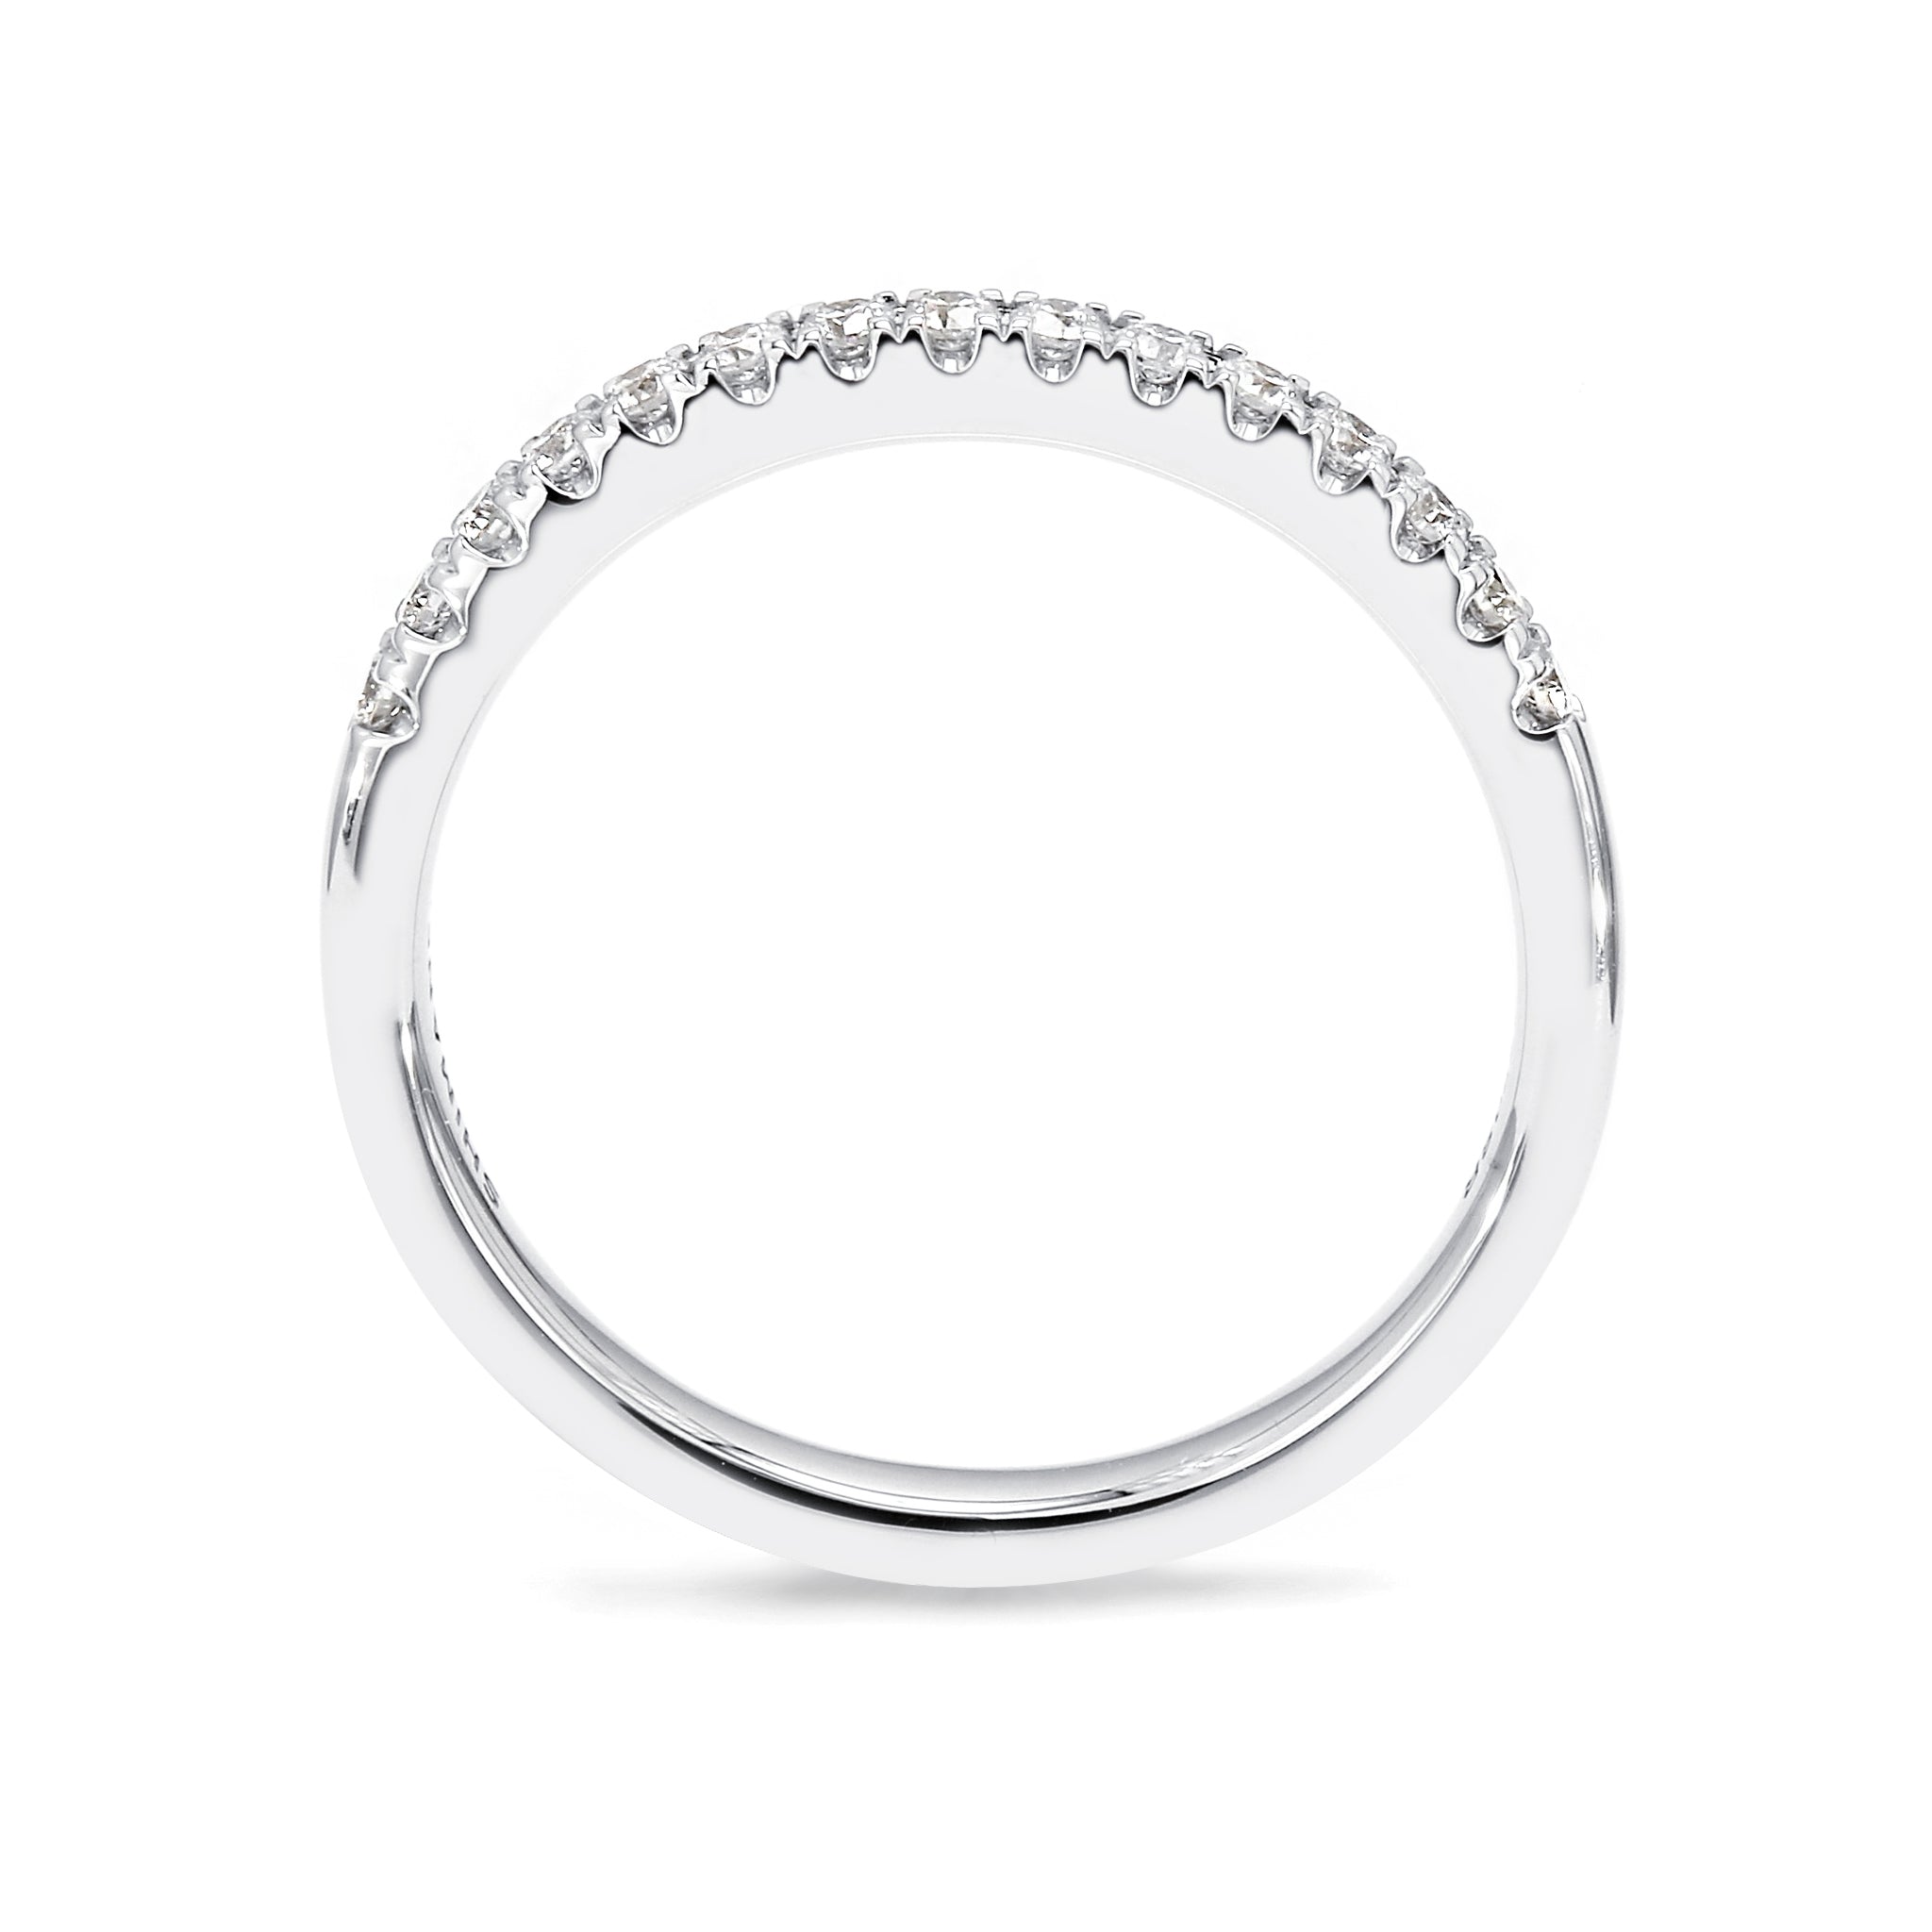 Shimansky - Ladies Diamond Wedding Band Crafted in 18K White Gold